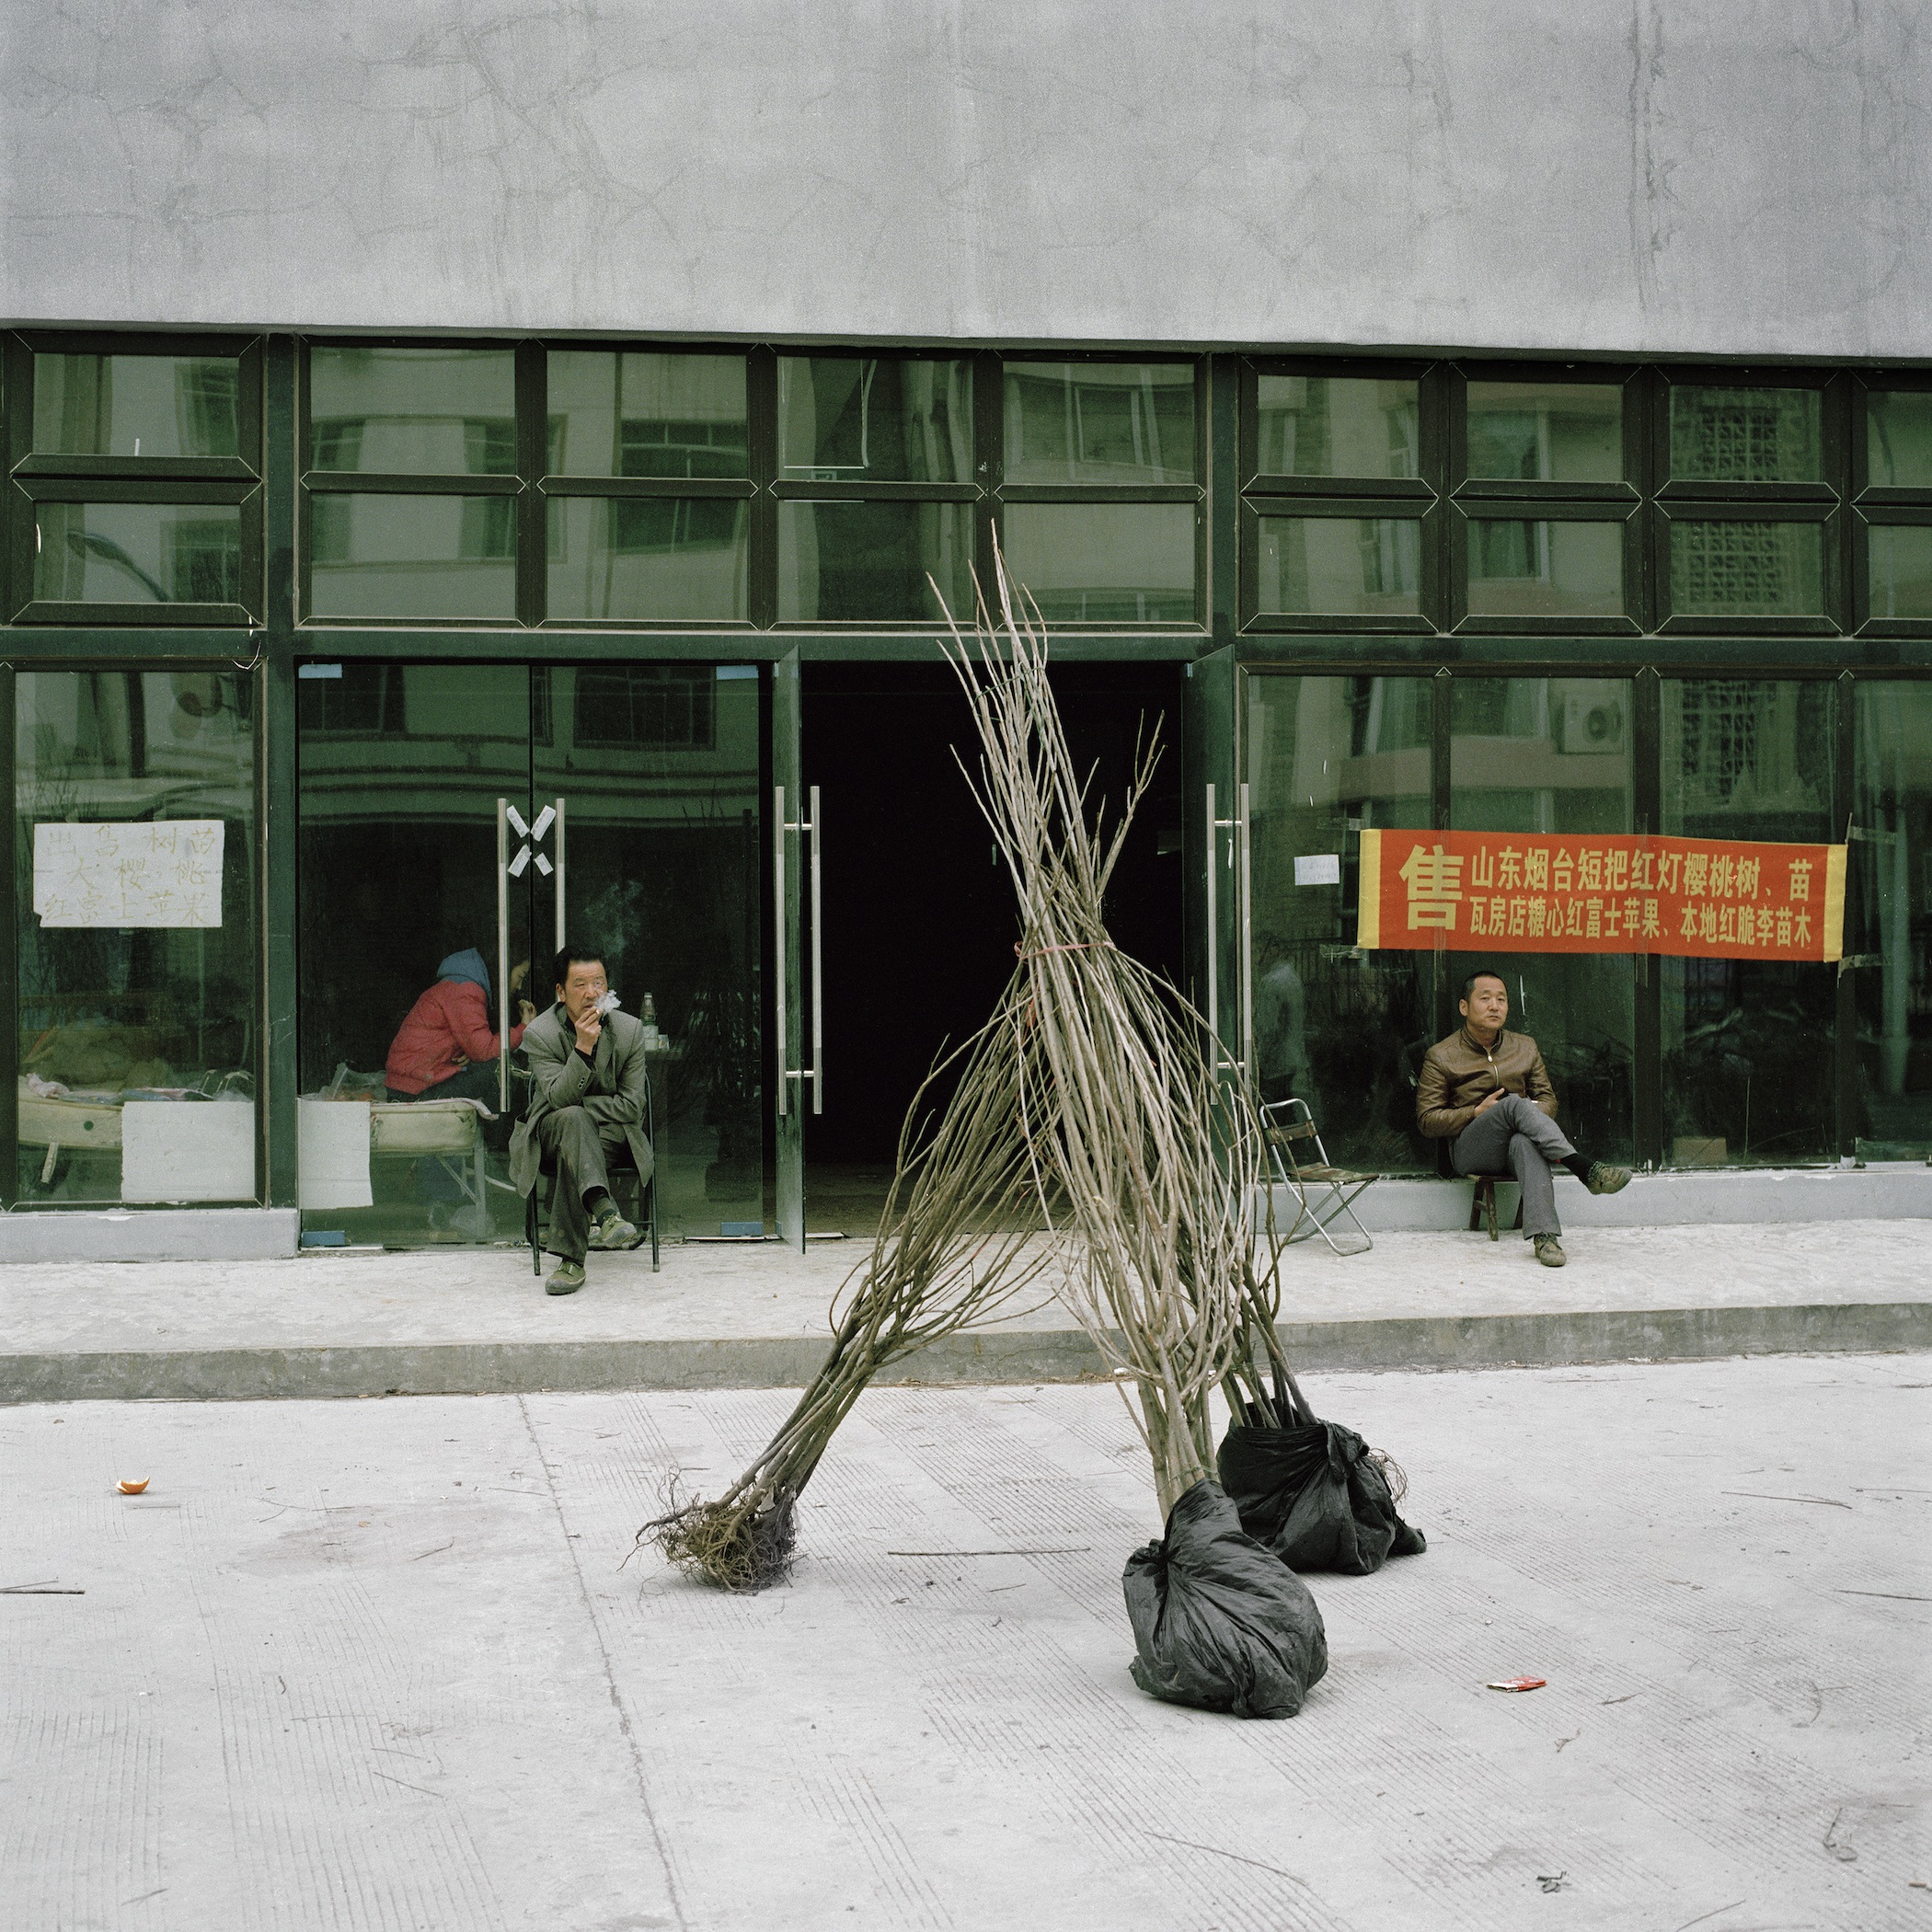 Tree Sellers from Northern China in front of their Temporarily Rented Warehouse, Wenchuan, Sichuan, China March 2016